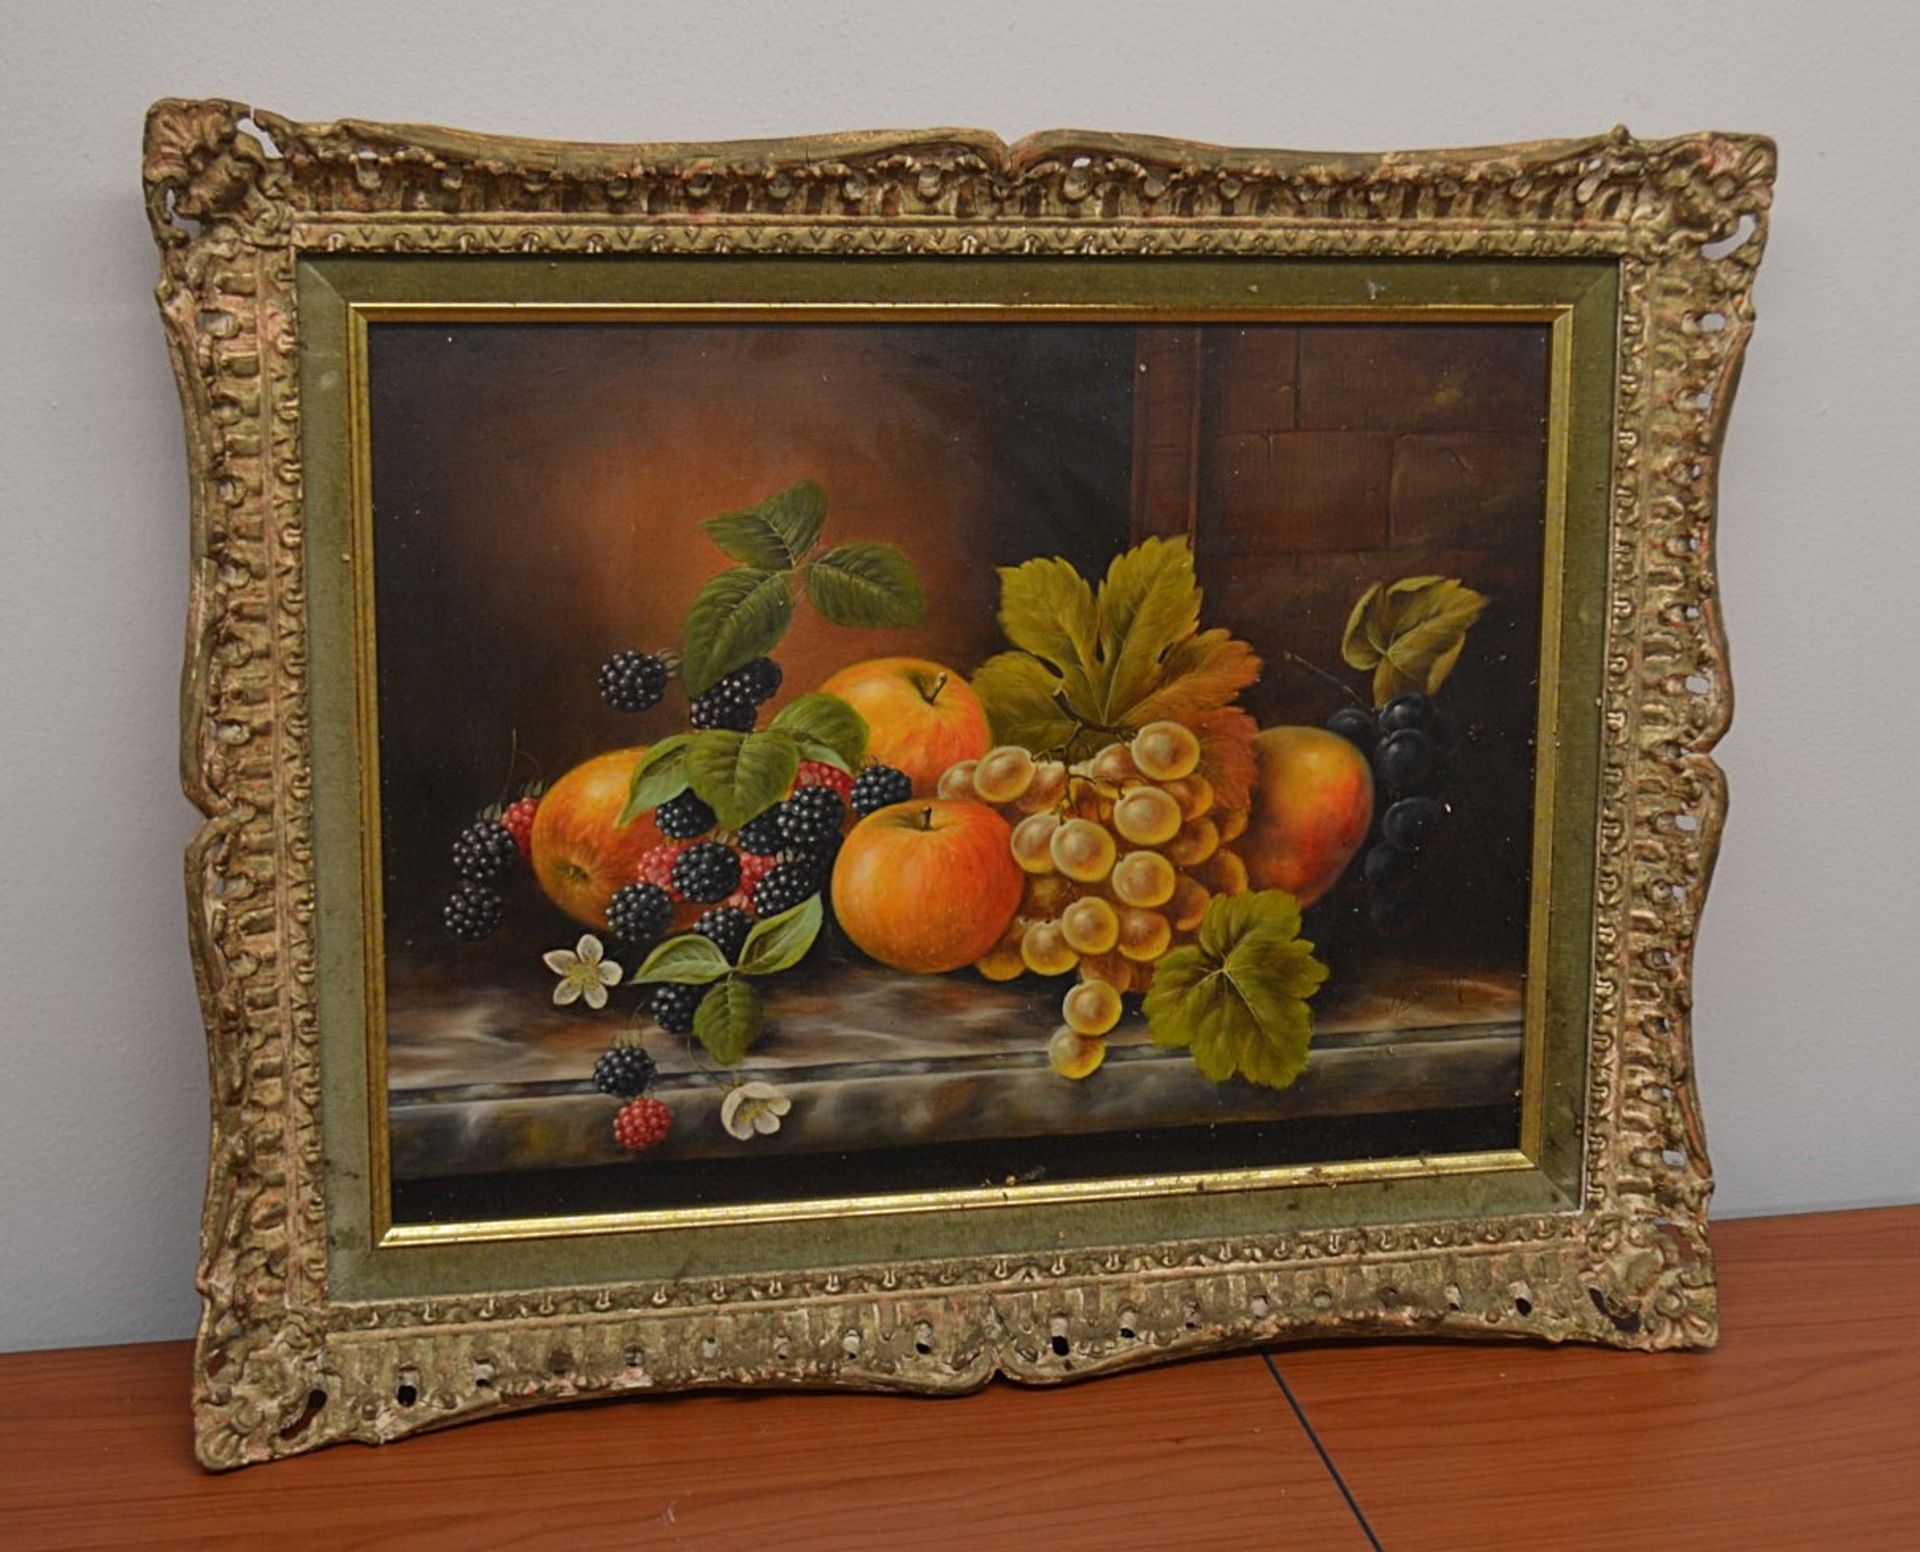 1 x Framed Picture Of Fruit - Dimensions: 52 x 42cm - Ref: MD164 / WH1 D-OFF - Pre-owned, From A